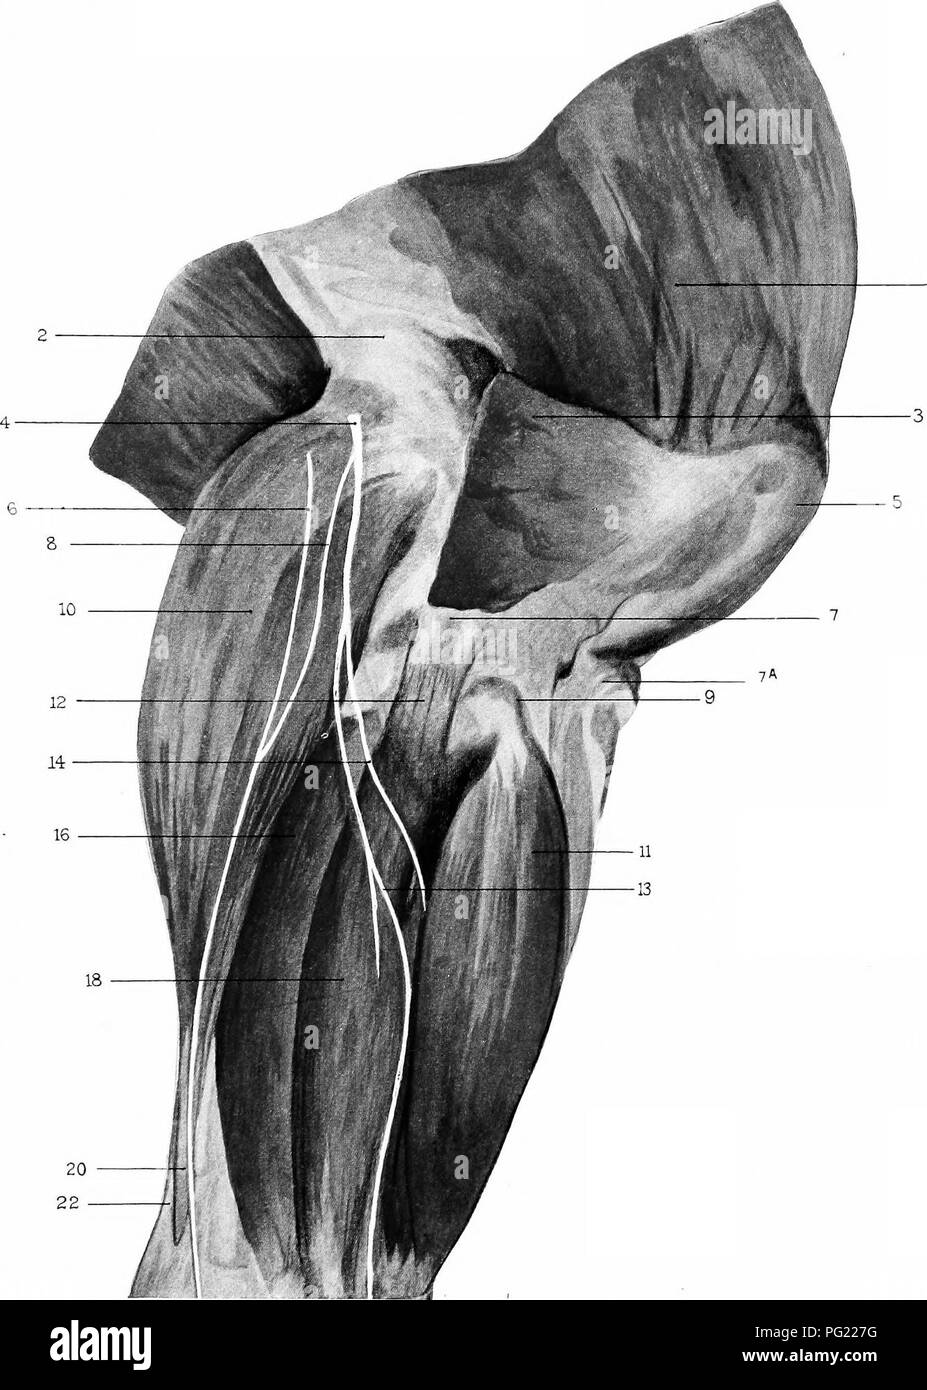 . The surgical anatomy of the horse ... Horses. Plate III. Superficial Dissection. Hind Limb (right), Outer aspect.—i. Quadriceps muscles. 2. Outer condyle of femur. 3. Insertion of superior division of biceps femoris. 4. External popliteal nerve. 5. Patella. 6. External sa|)henous nerve. 7. External lateral ligament of stifle. 7A. Insertion of external straight patellar ligament into anterior tuberosity of tibia. 8. Communicating branch from external popliteal nerve to external saphenous nerve. 9. Common tendon of extensor pedis and tendinous division of flexor metatai'si. 10. Outer belly of  Stock Photo